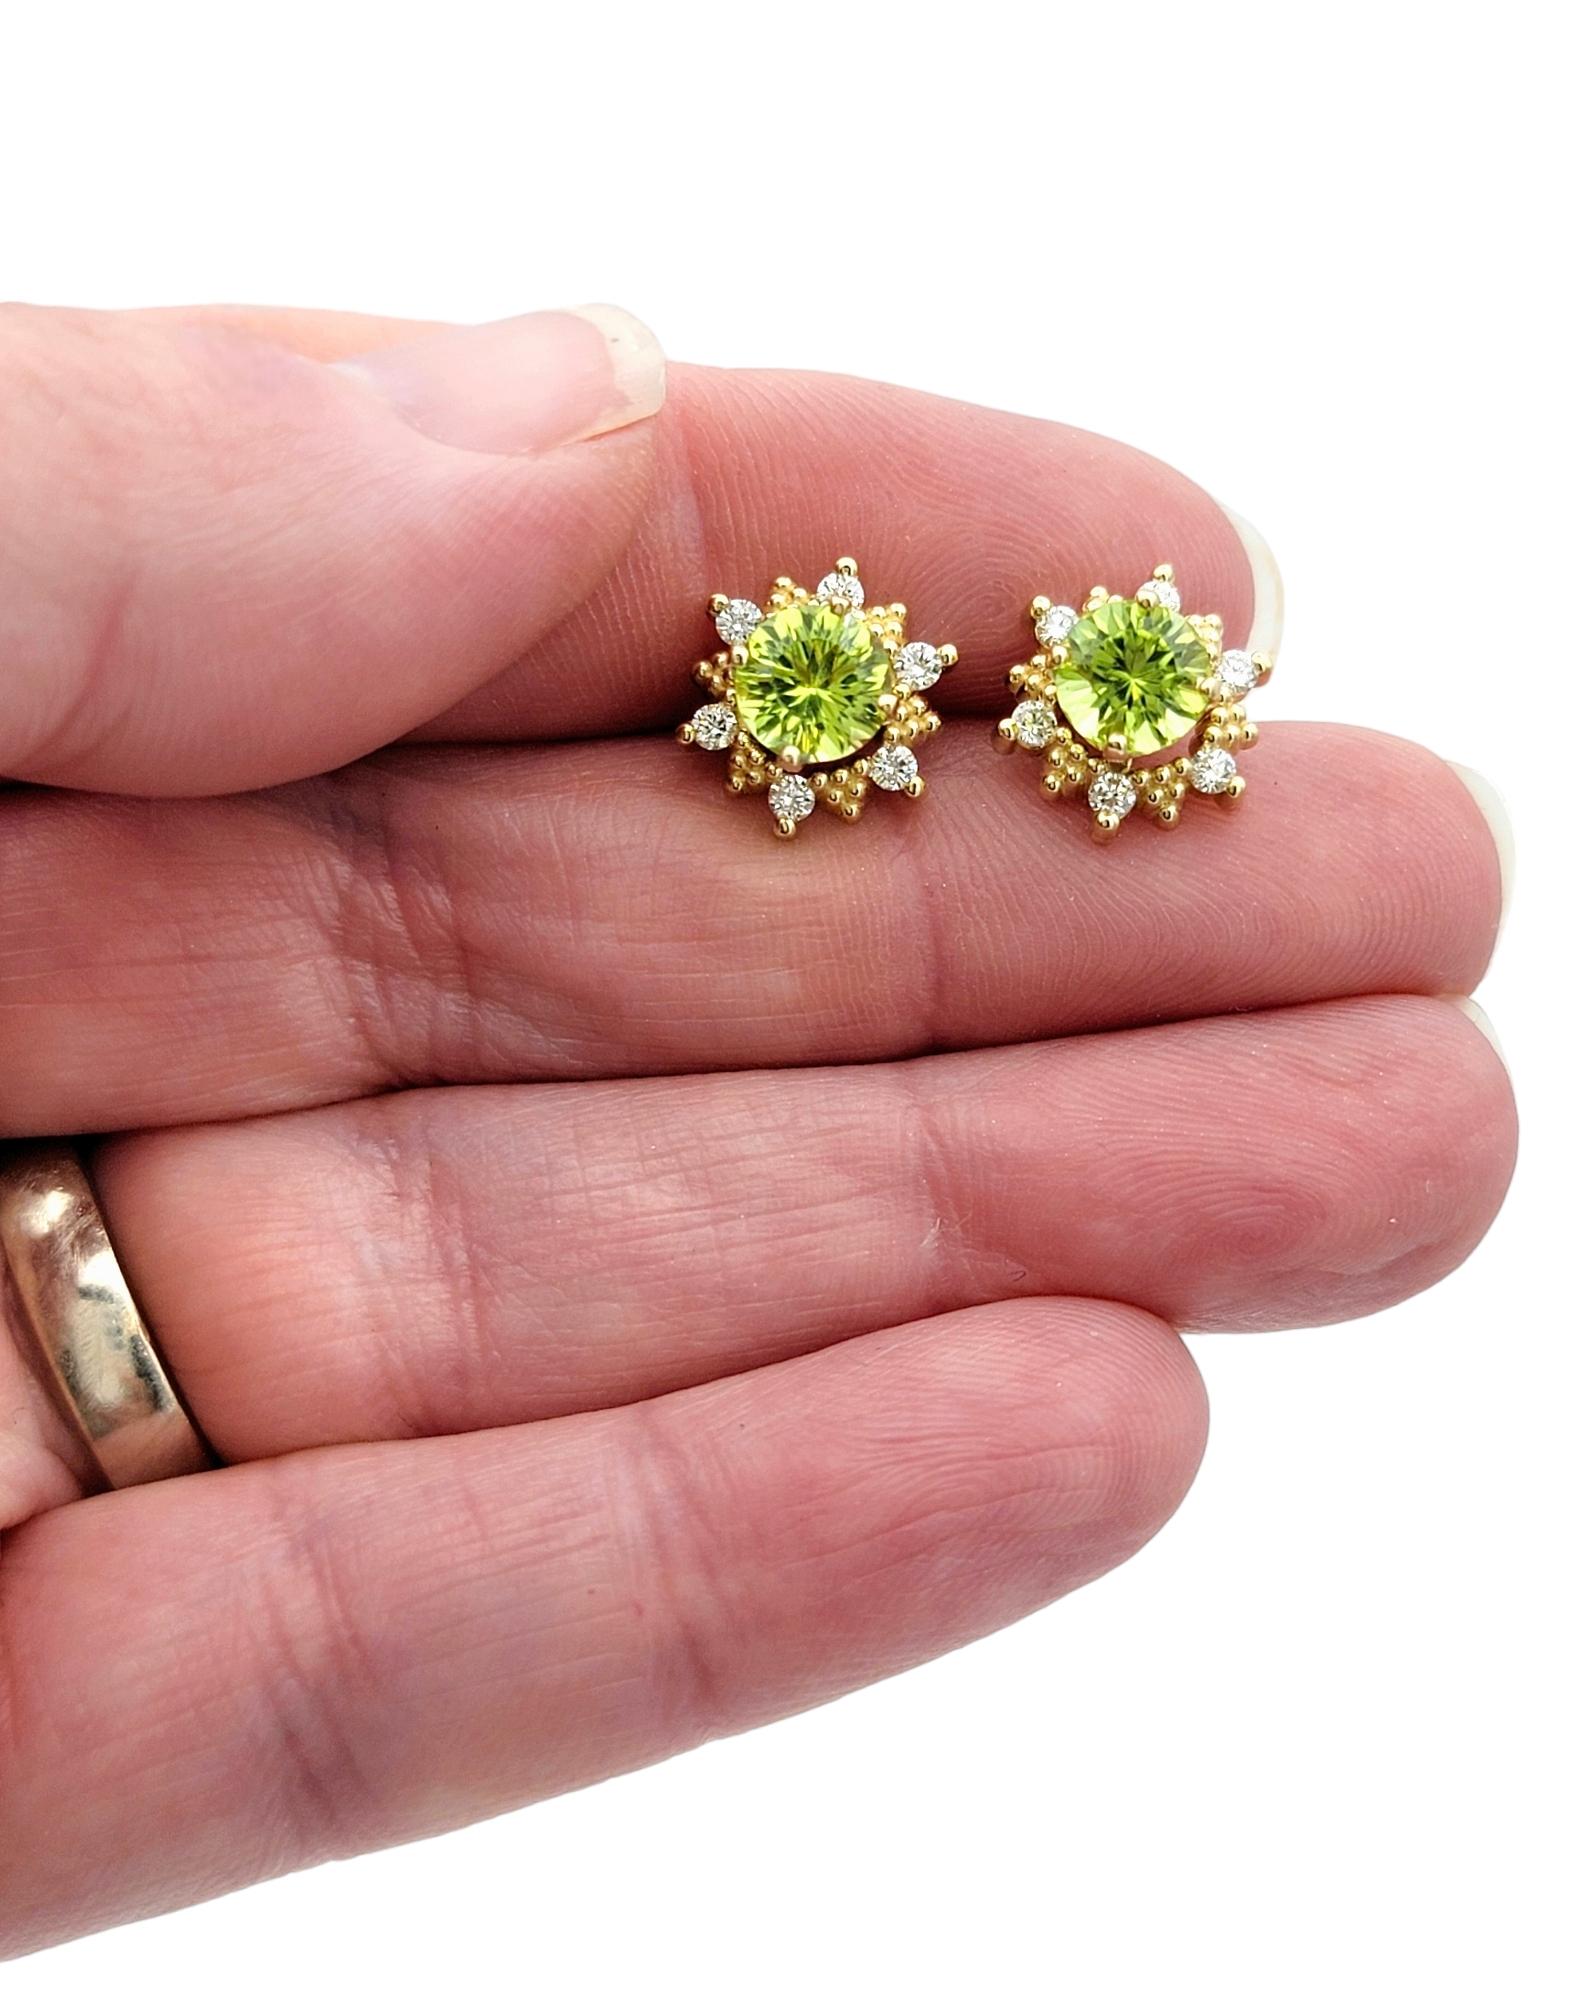 Round Peridot Stud Earrings with Diamond Halo Jackets in 14 Karat Yellow Gold For Sale 4